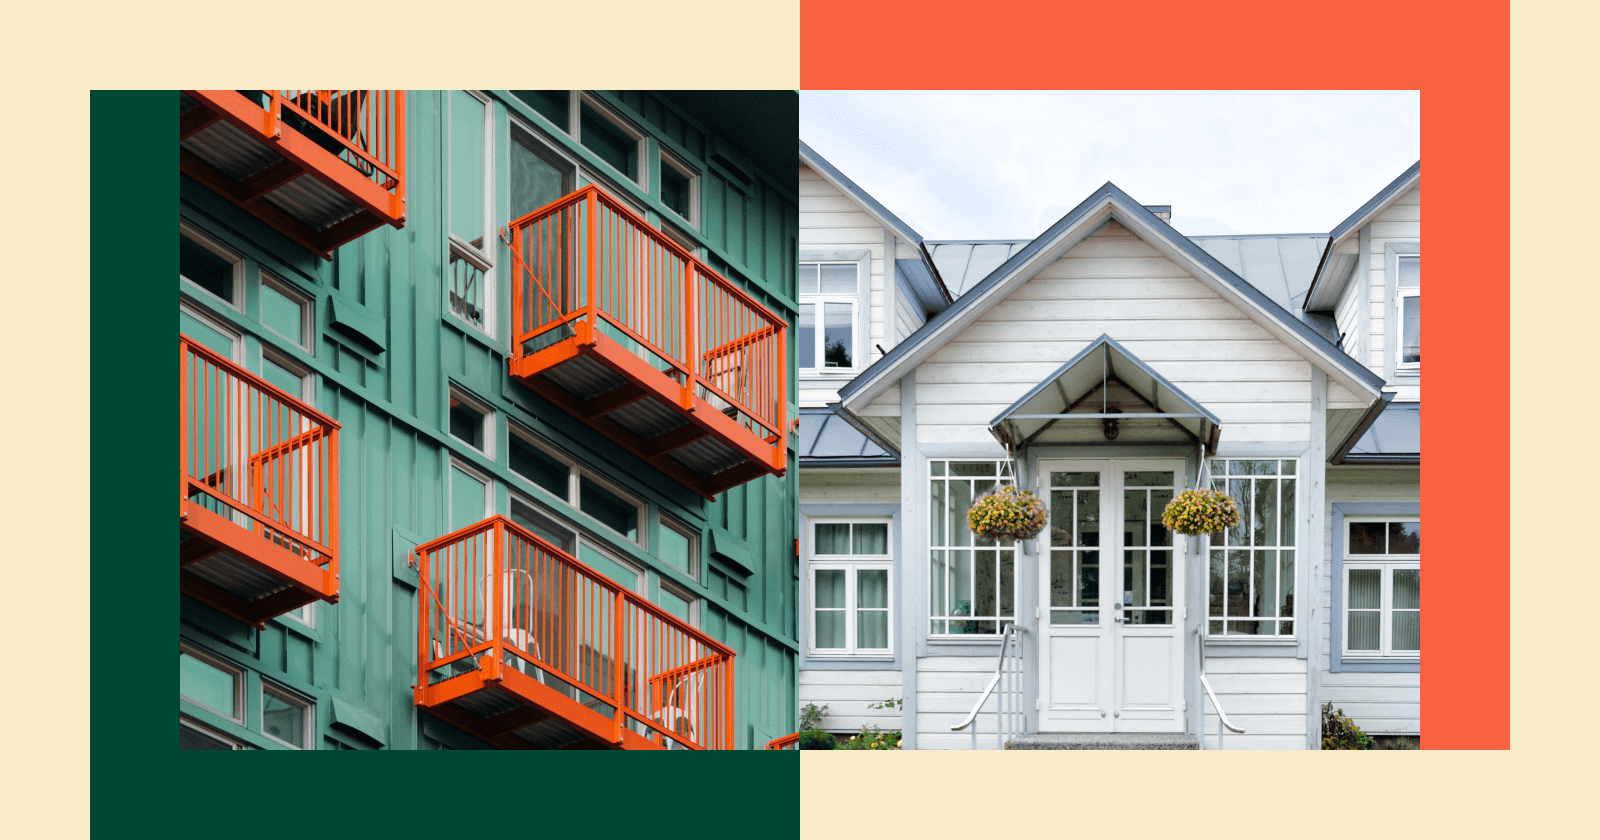 Two Stylized Images with Red, Yellow, Green Accents of A Rental Property on the Left and a House on the Right